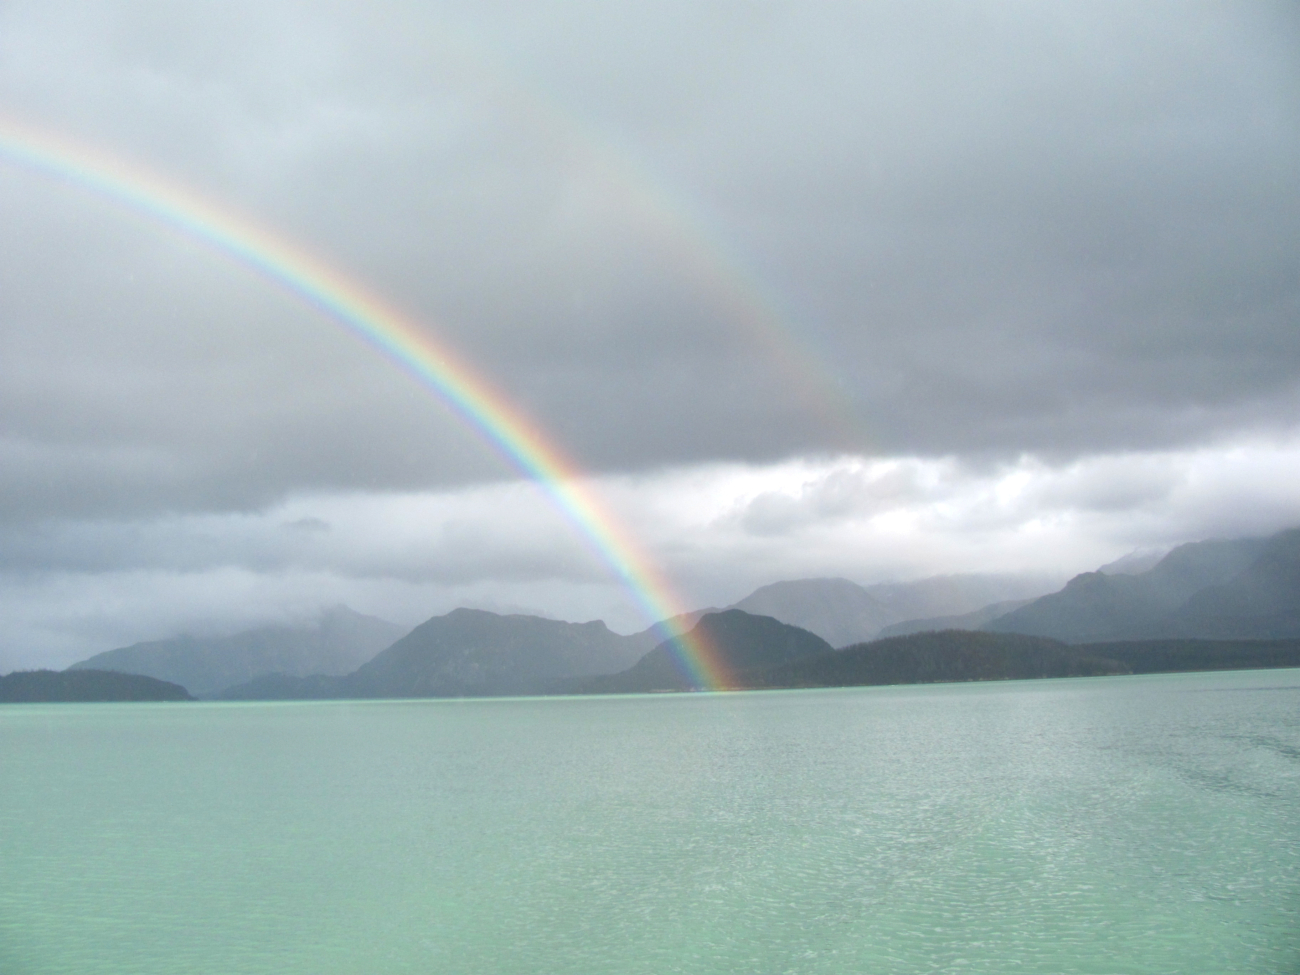 Double rainbow over milky green waters of Cross Sound